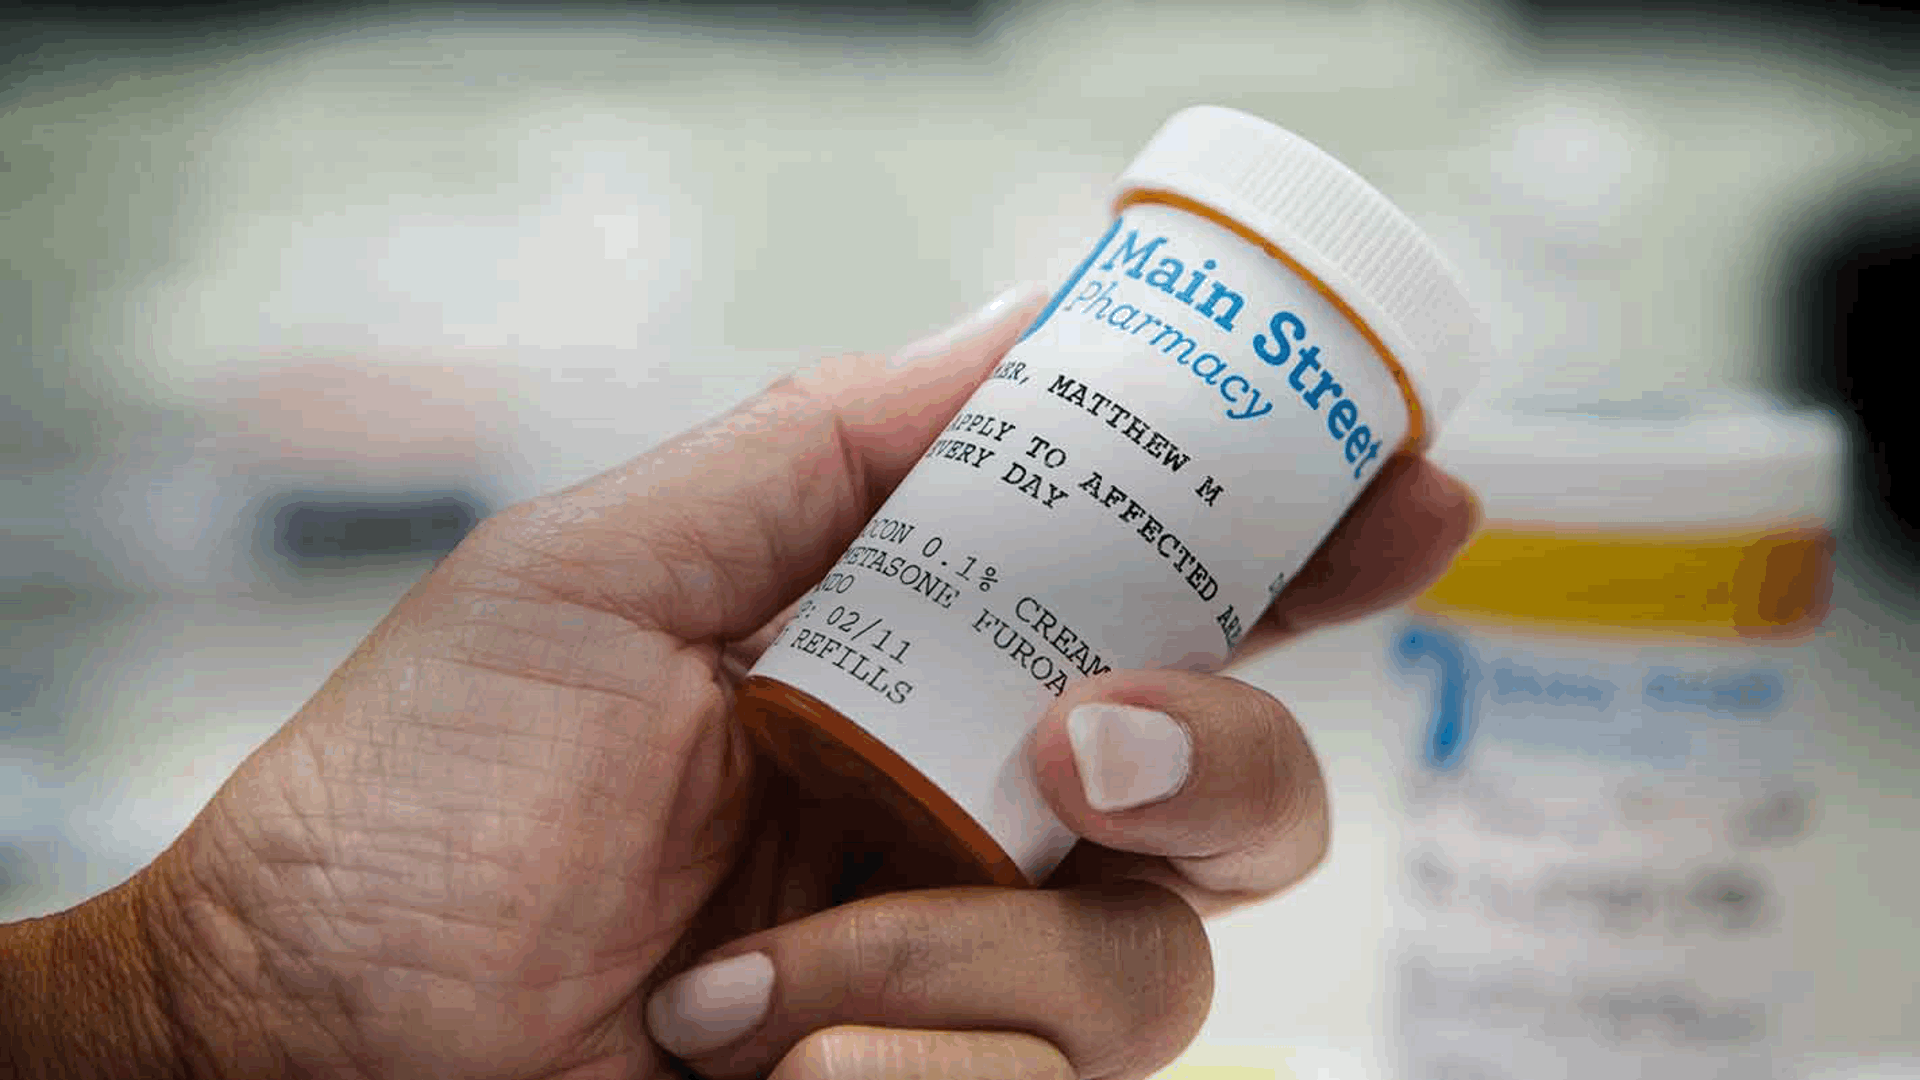 GIF of a medicine bottle with the patient name being obfuscated by blurring